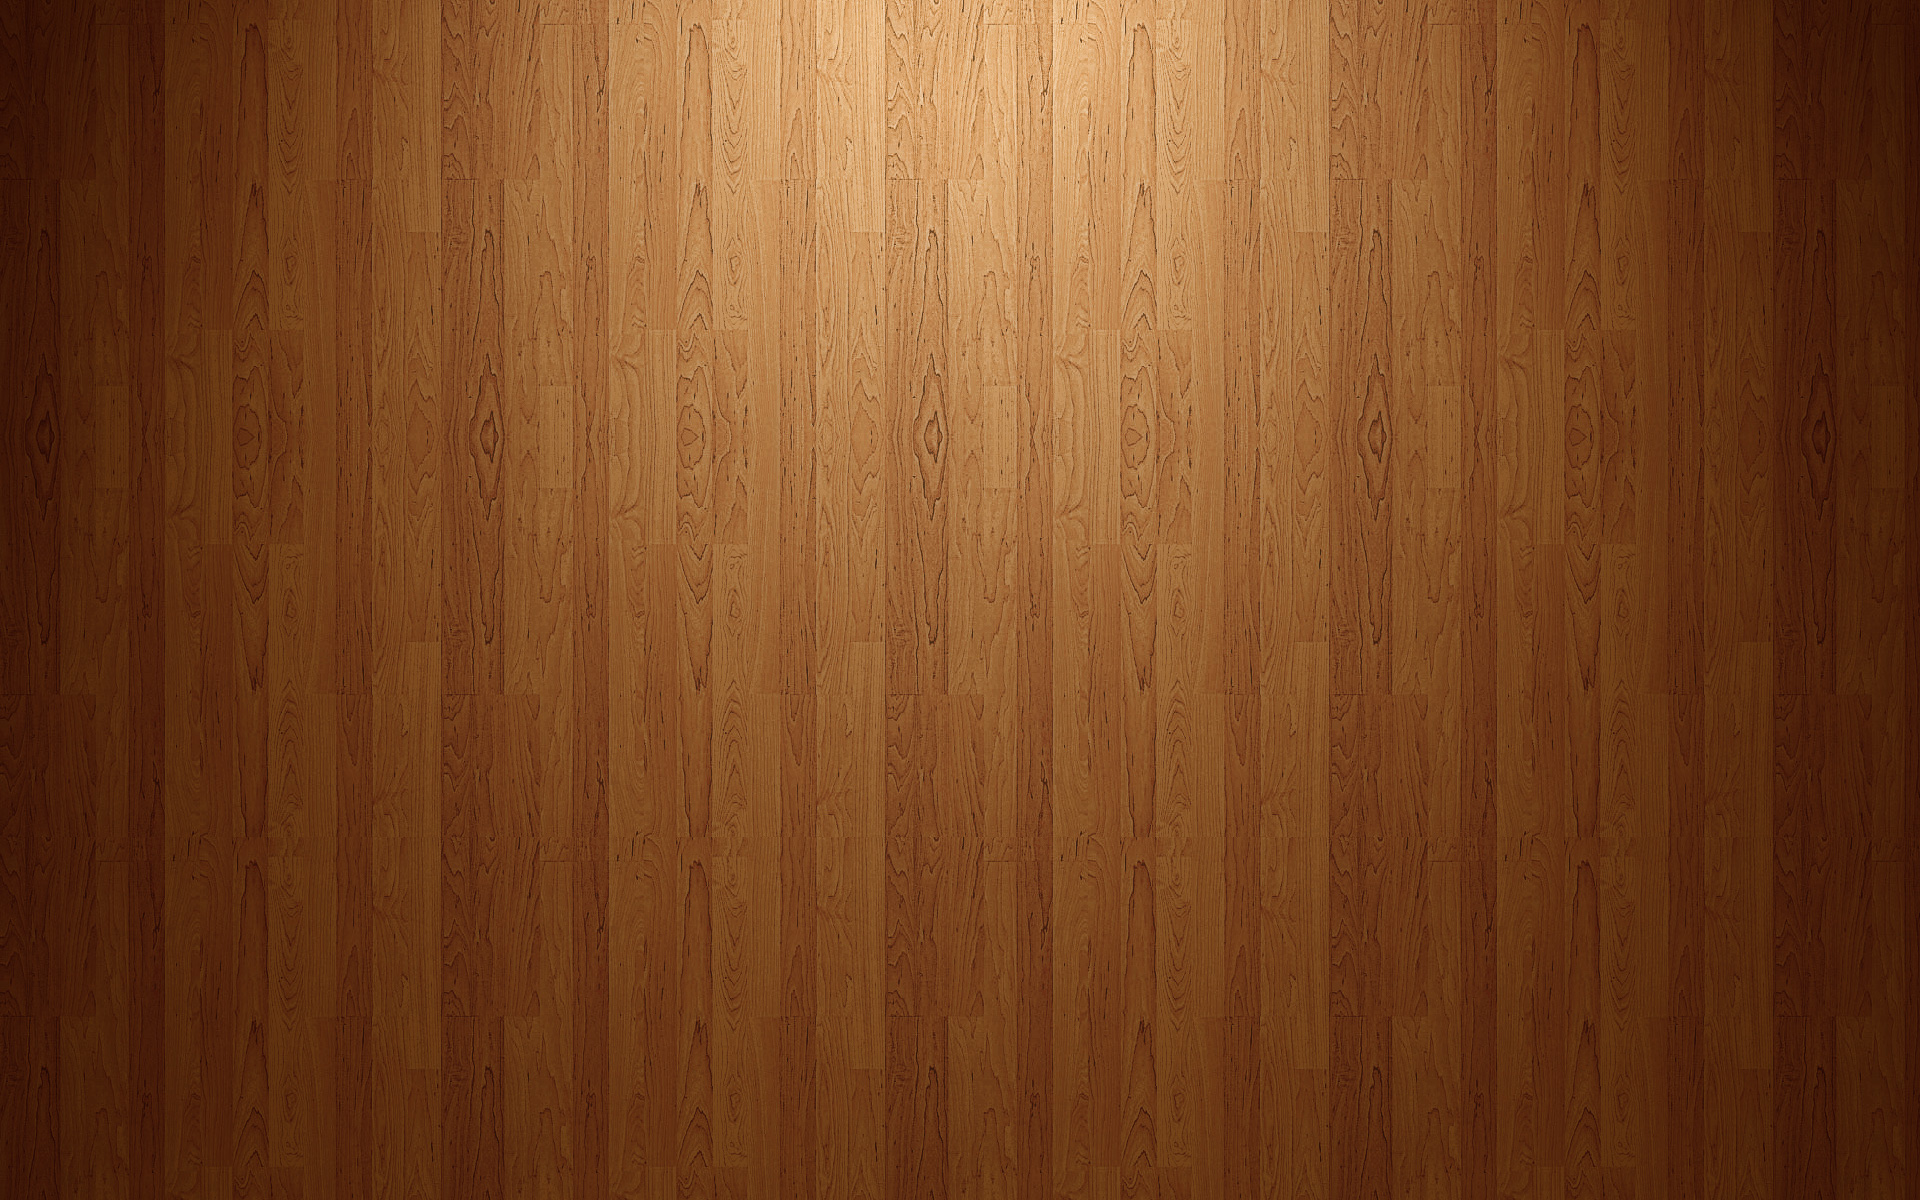 DISSYMMTERIC WOOD Android Homescreen by kebogiraz   MyColorscreen